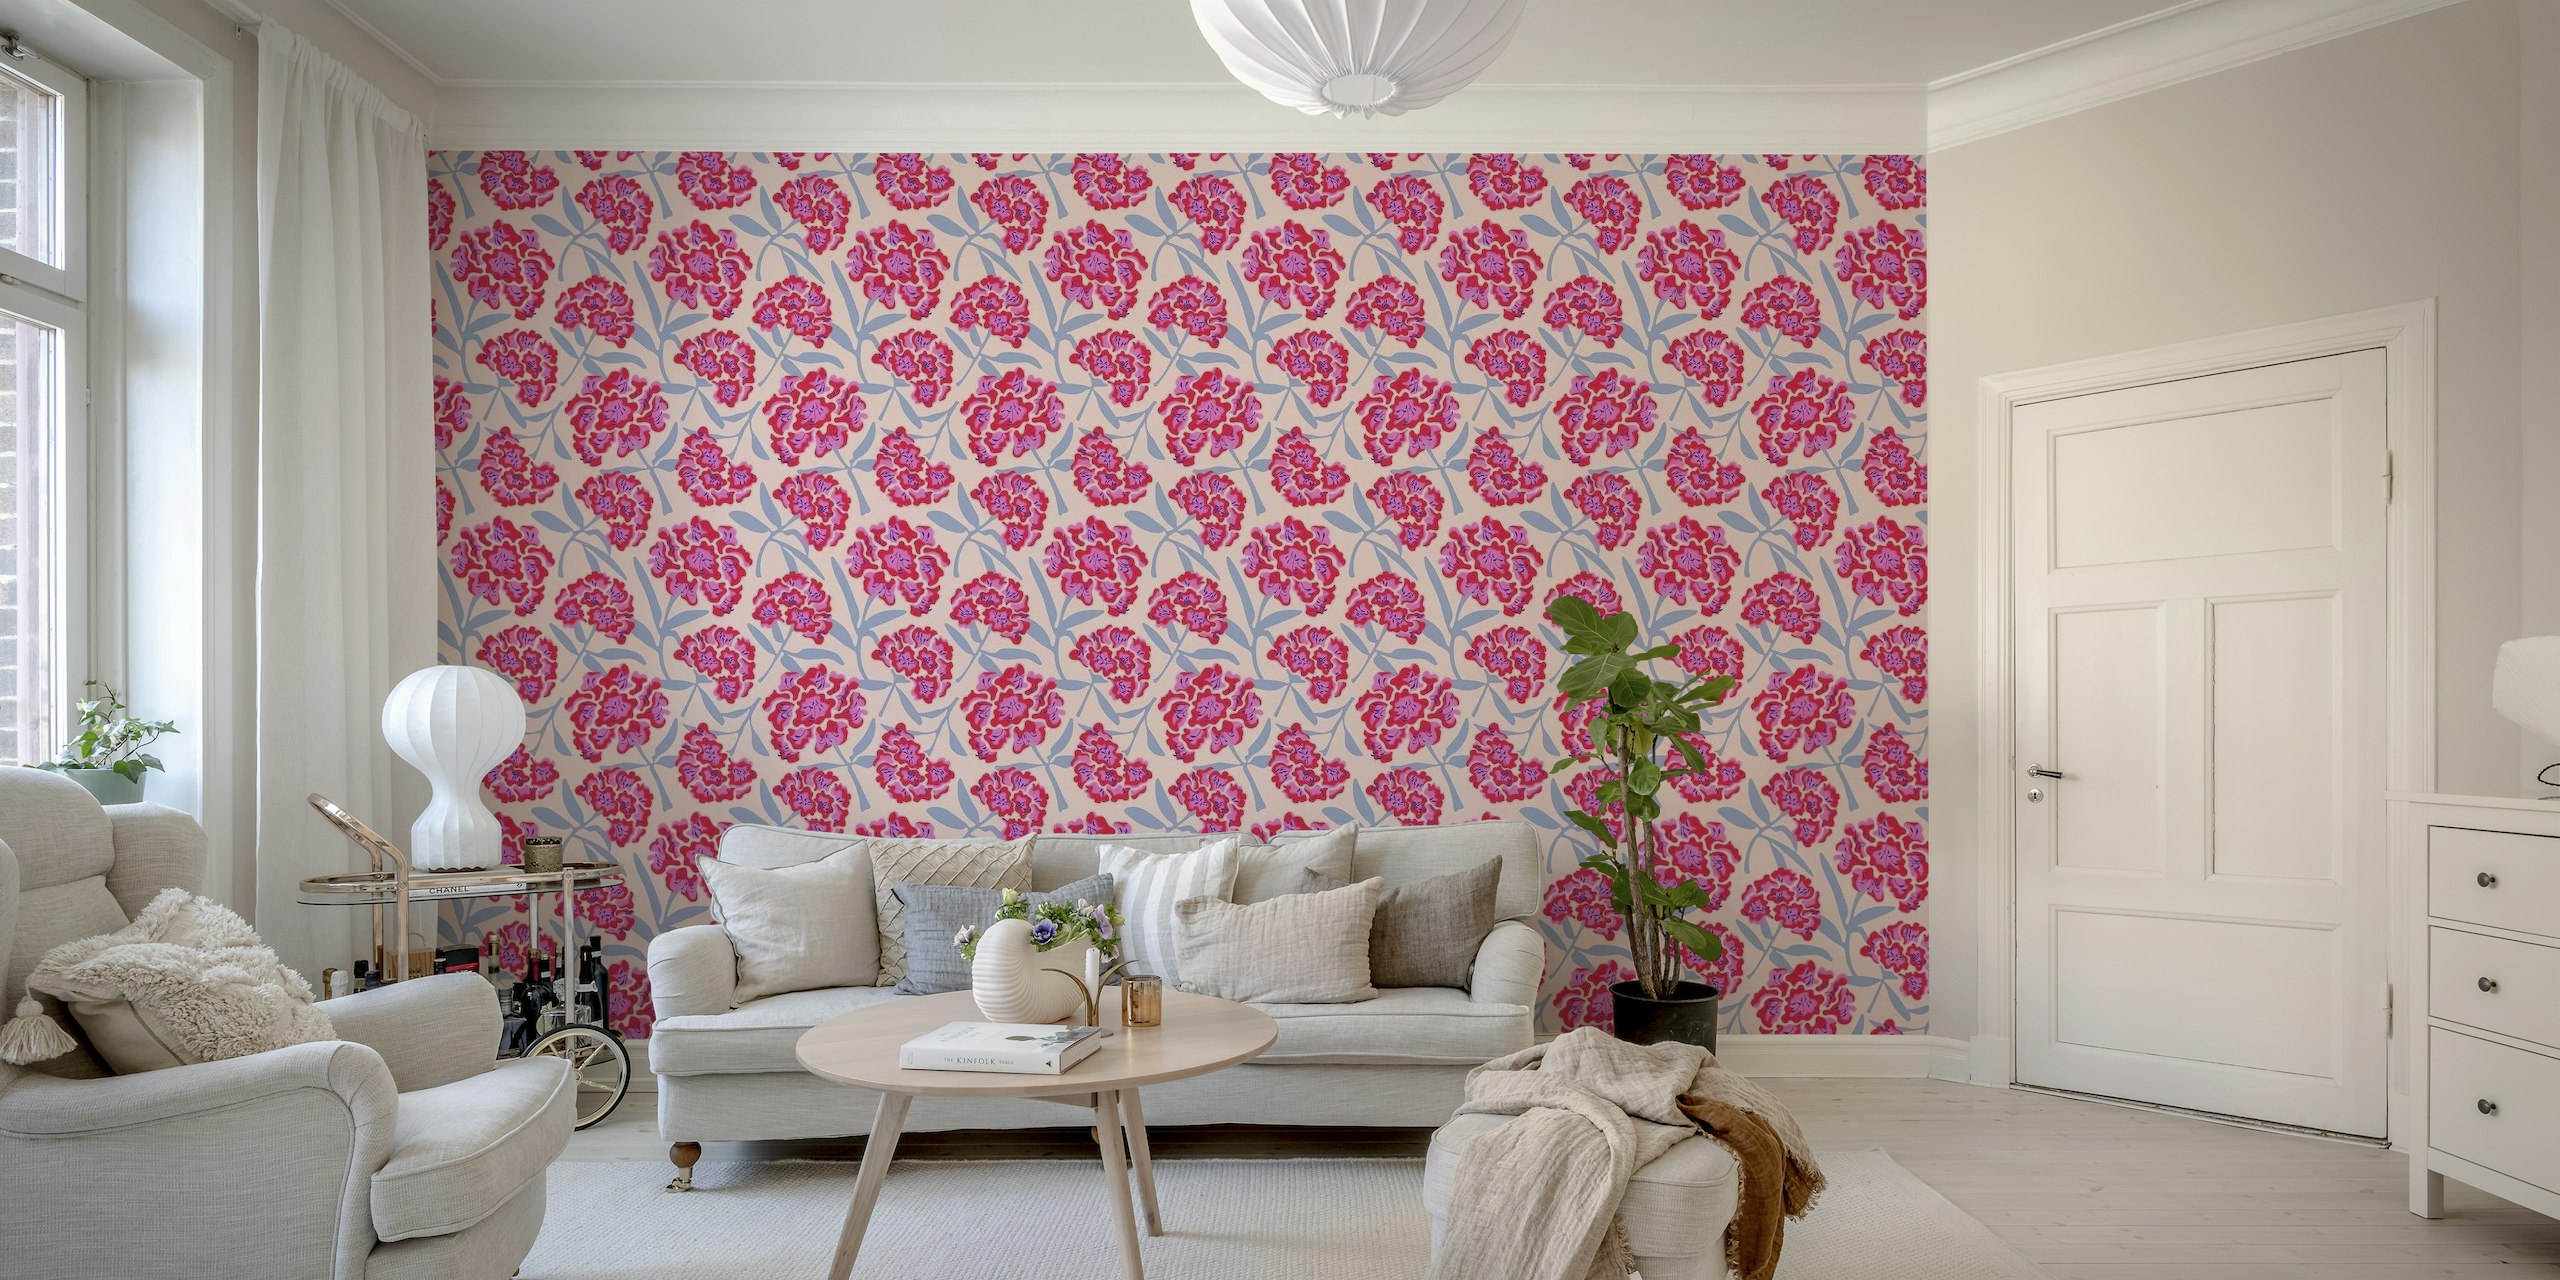 RHODODENDRONS Floral - Fuchsia Pink - Large wallpaper